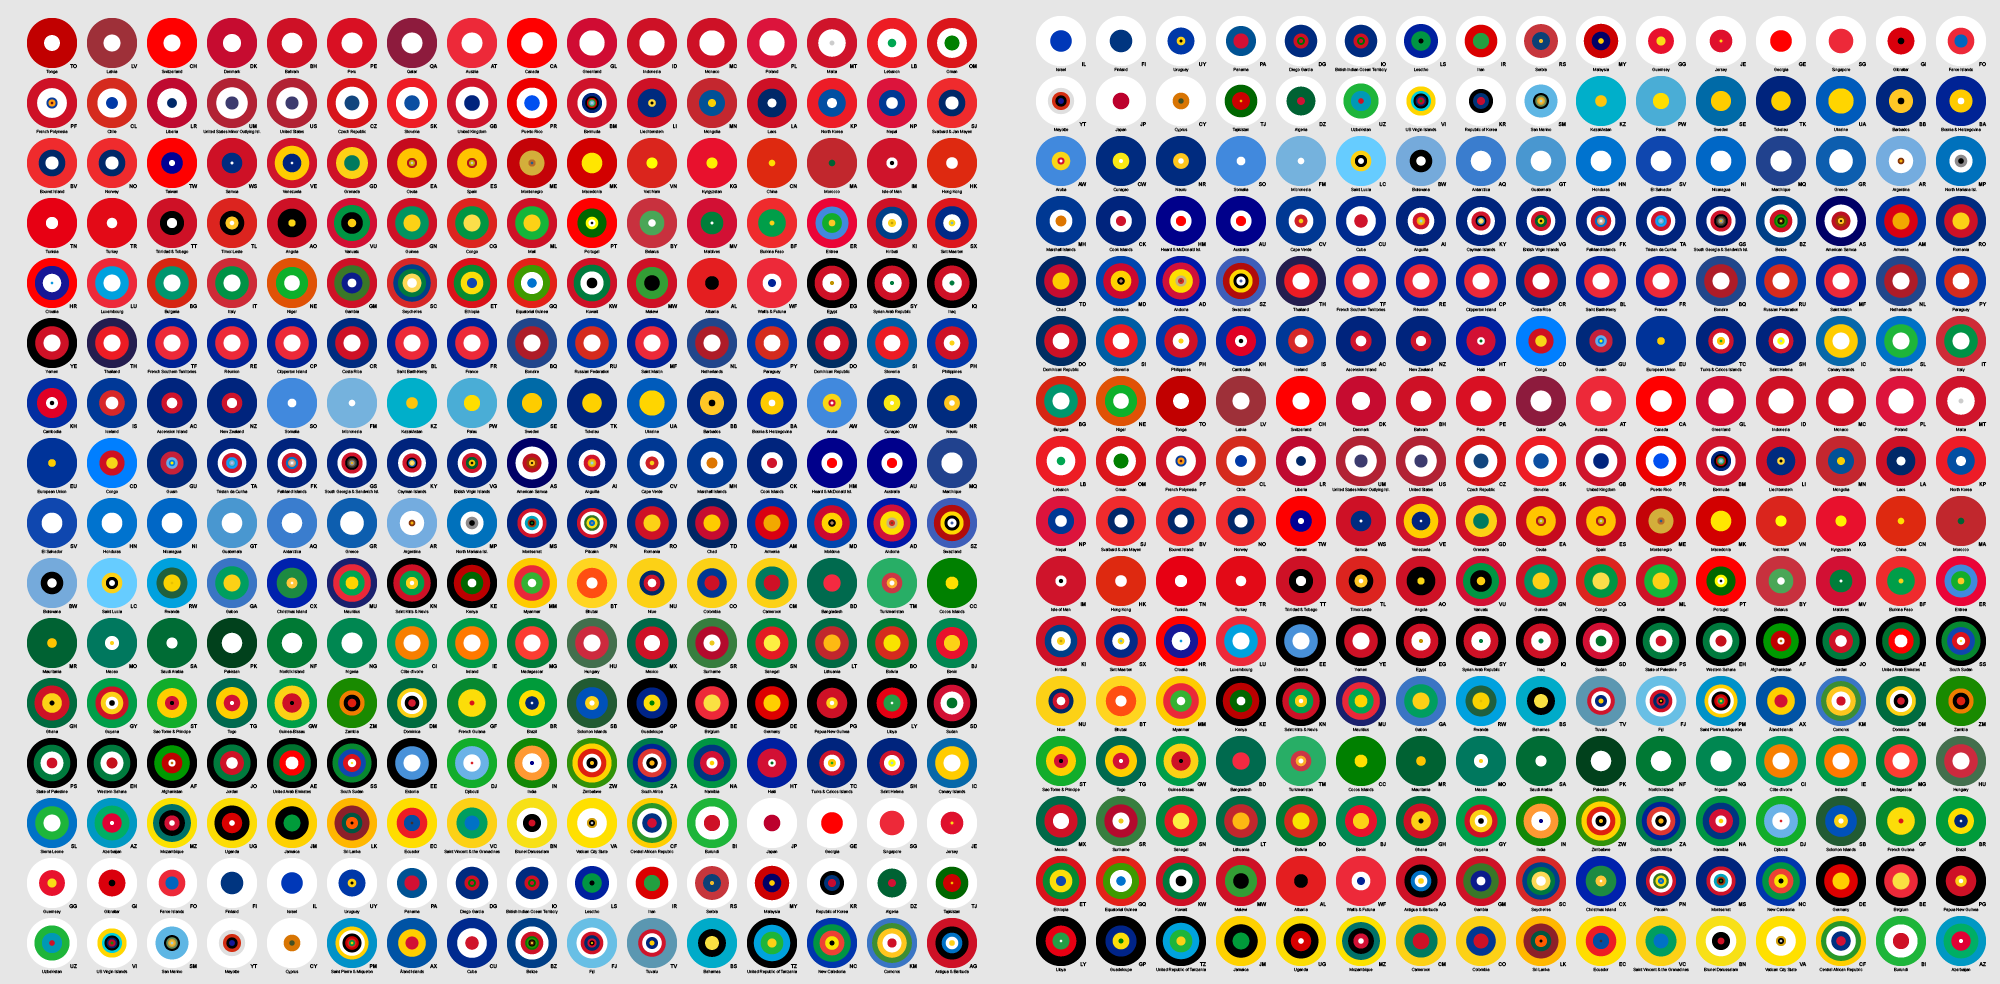 Color proportions in country flags / Martin Krzywinski @MKrzywinski mkweb.bcgsc.ca